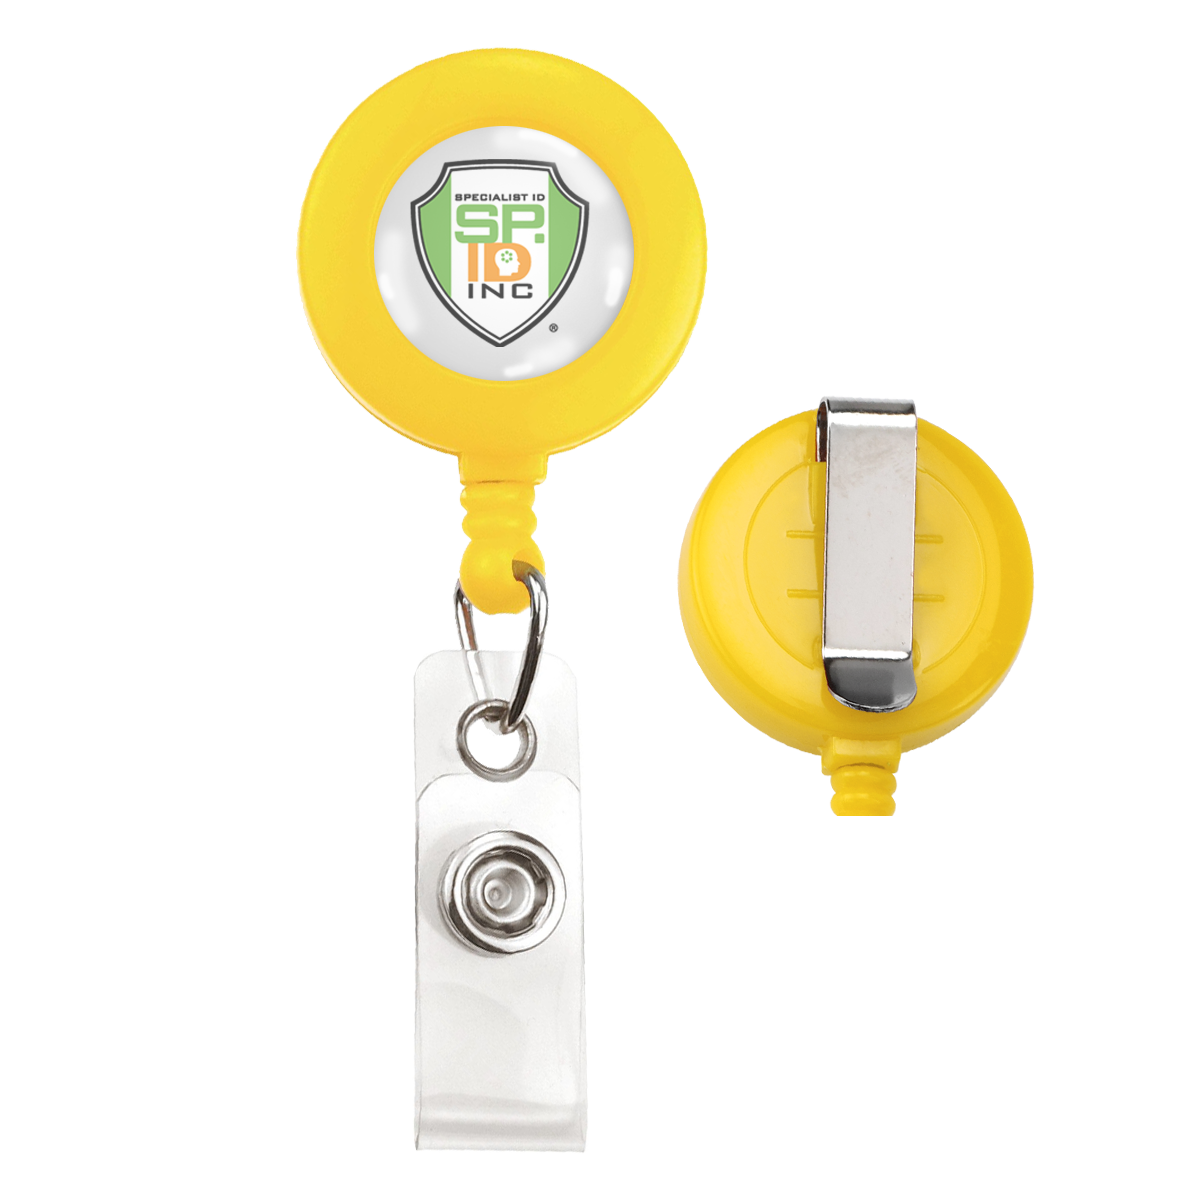 A Custom Printed Retractable Badge Reel With Belt Clip - Personalize with Your Brand Logo, featuring full color graphics and a white clip, complemented by a metal clip on the back. The logo, "SP 19 INC," is prominently displayed in the center. Custom badge reels like this are an excellent way to promote brand awareness.